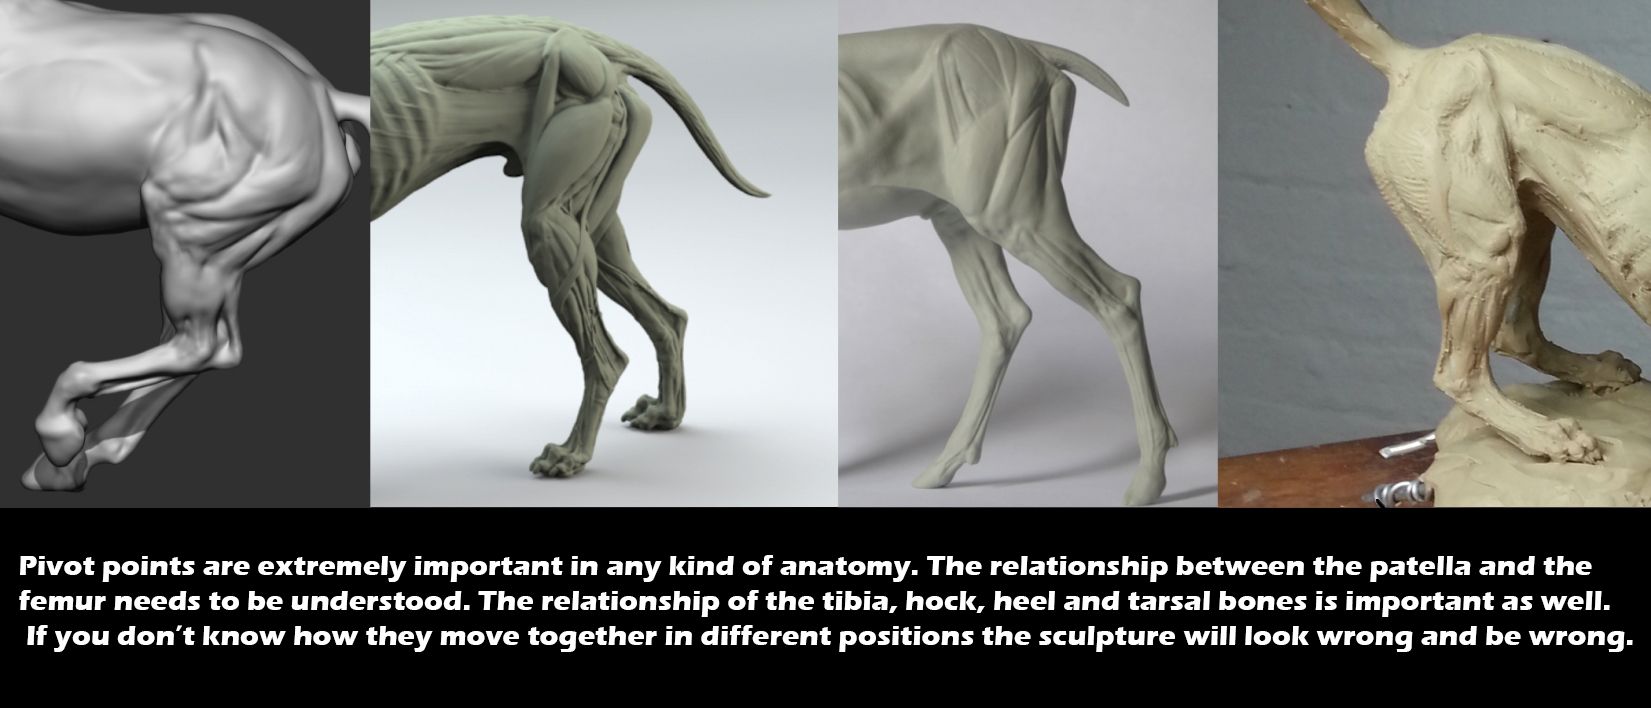 Research anatomy in detail.